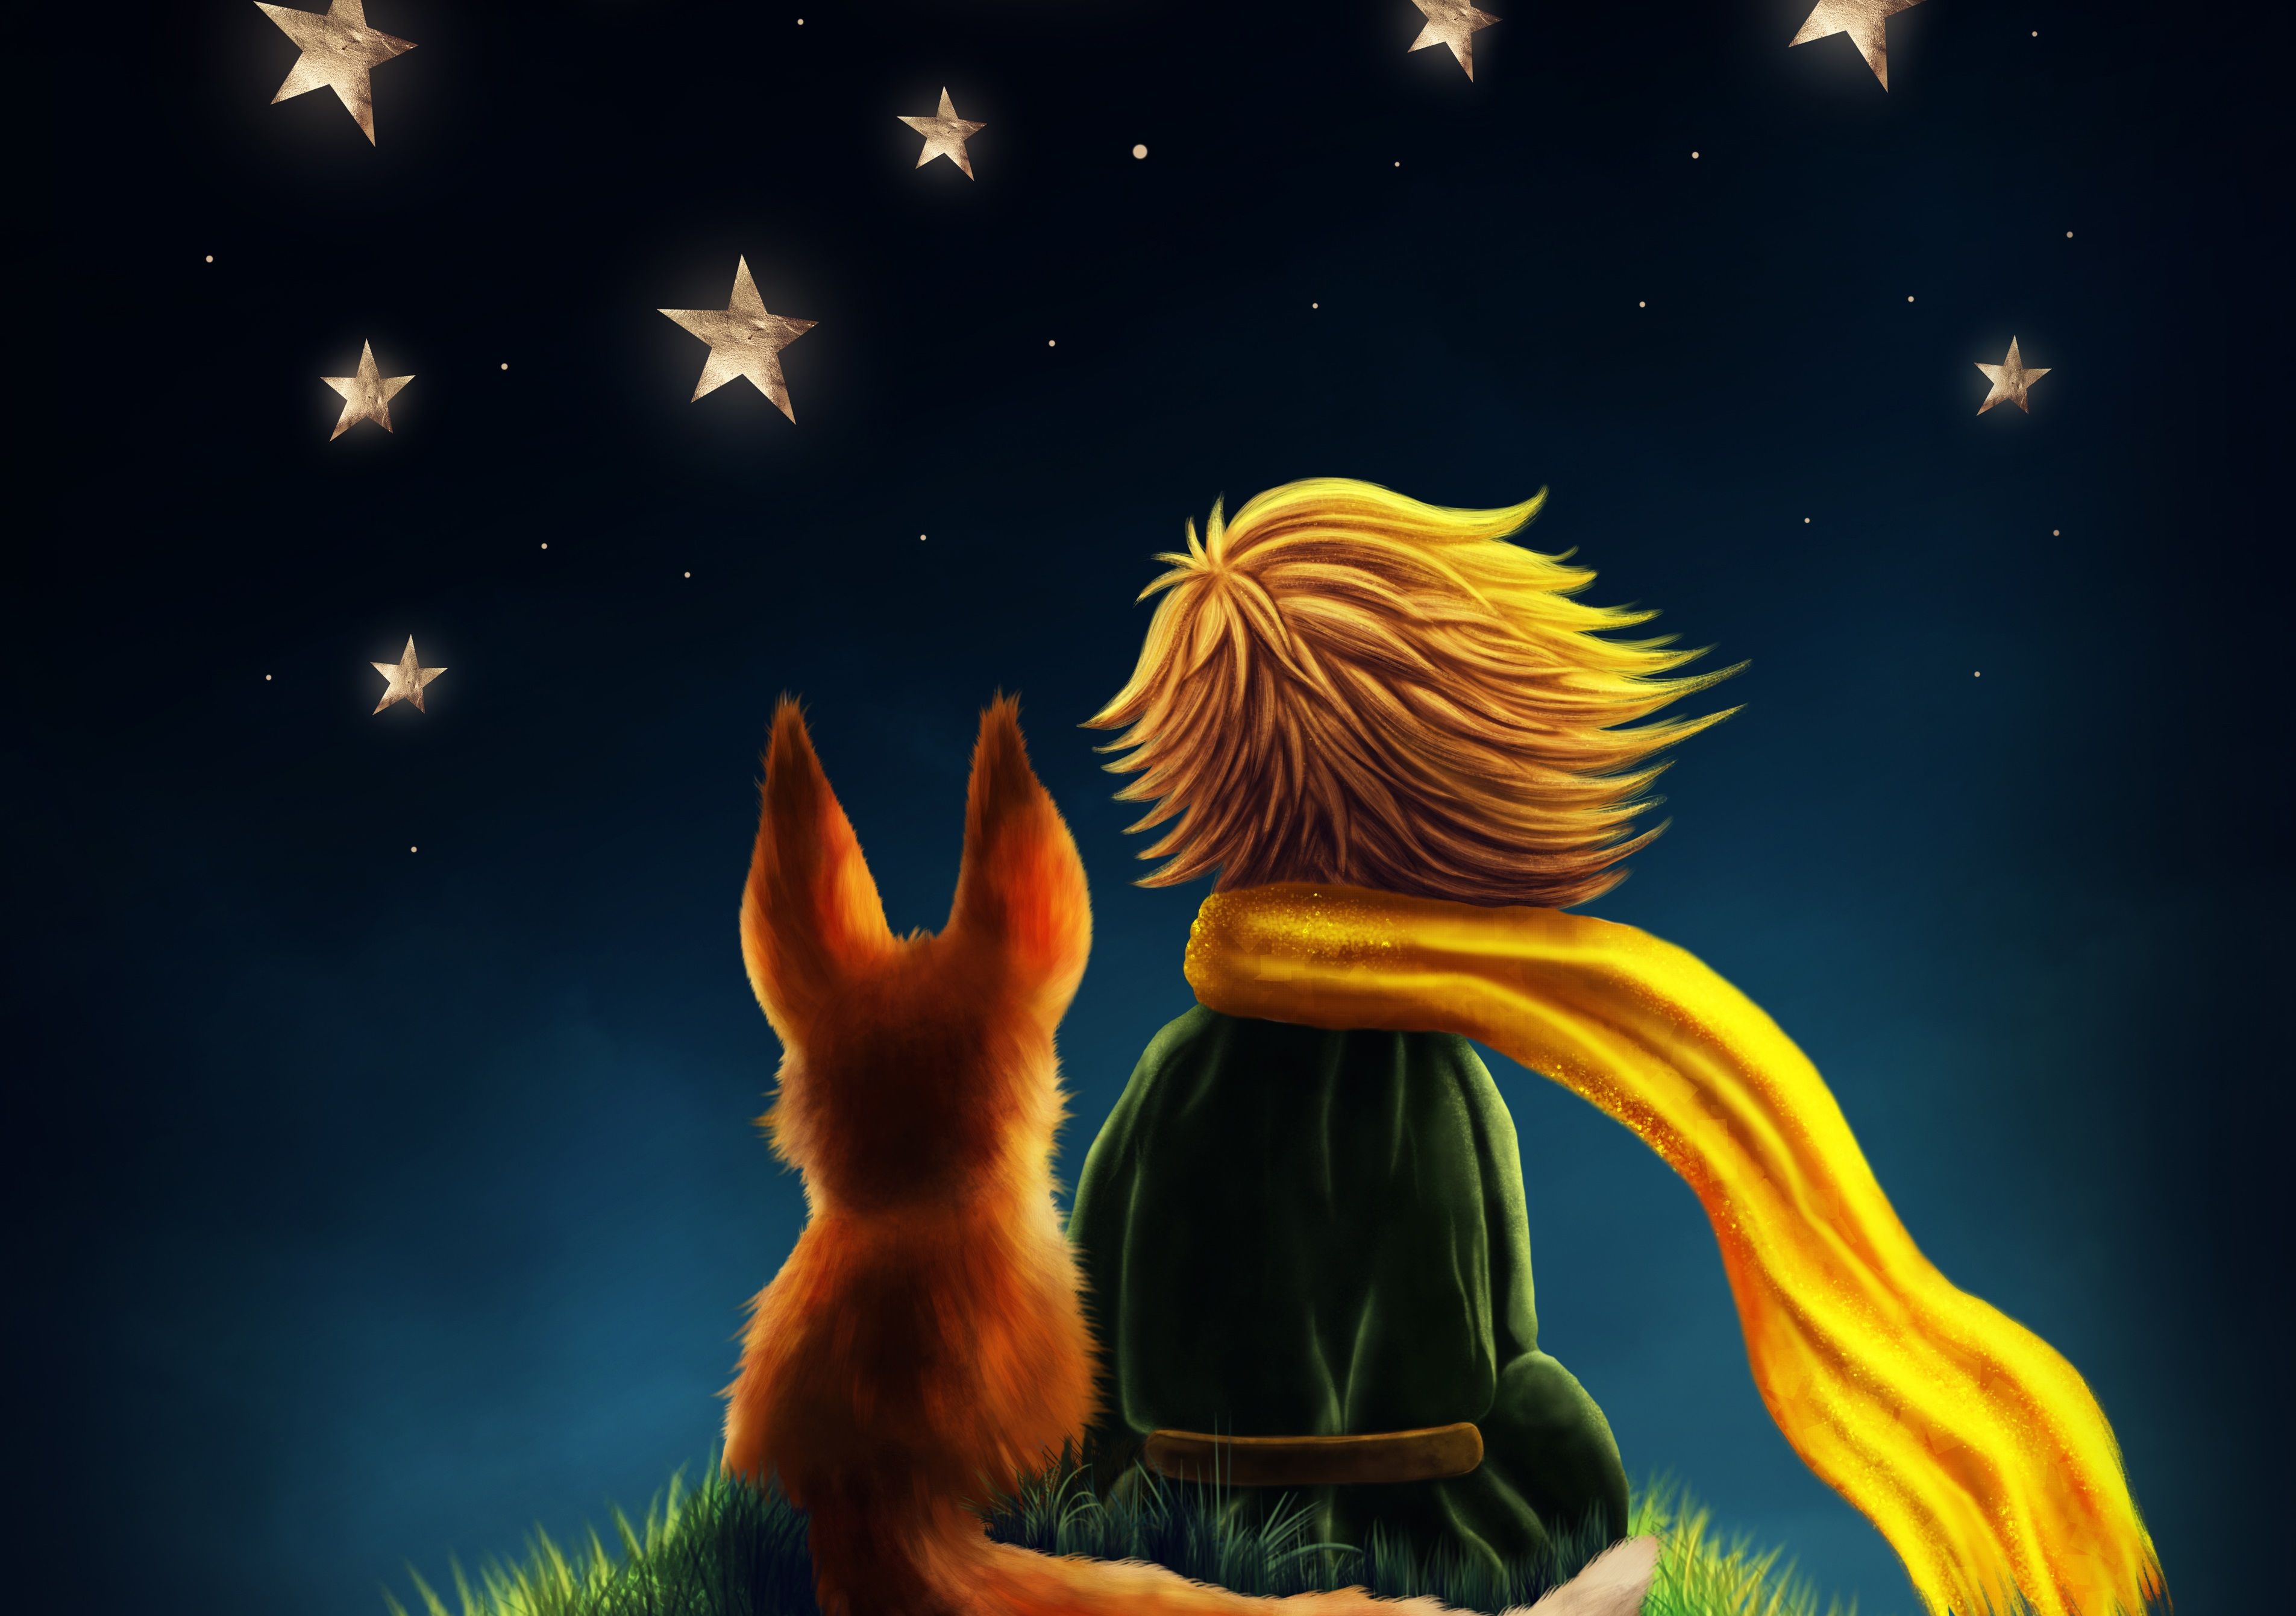 Wallpaper The Little Prince Wallpapers